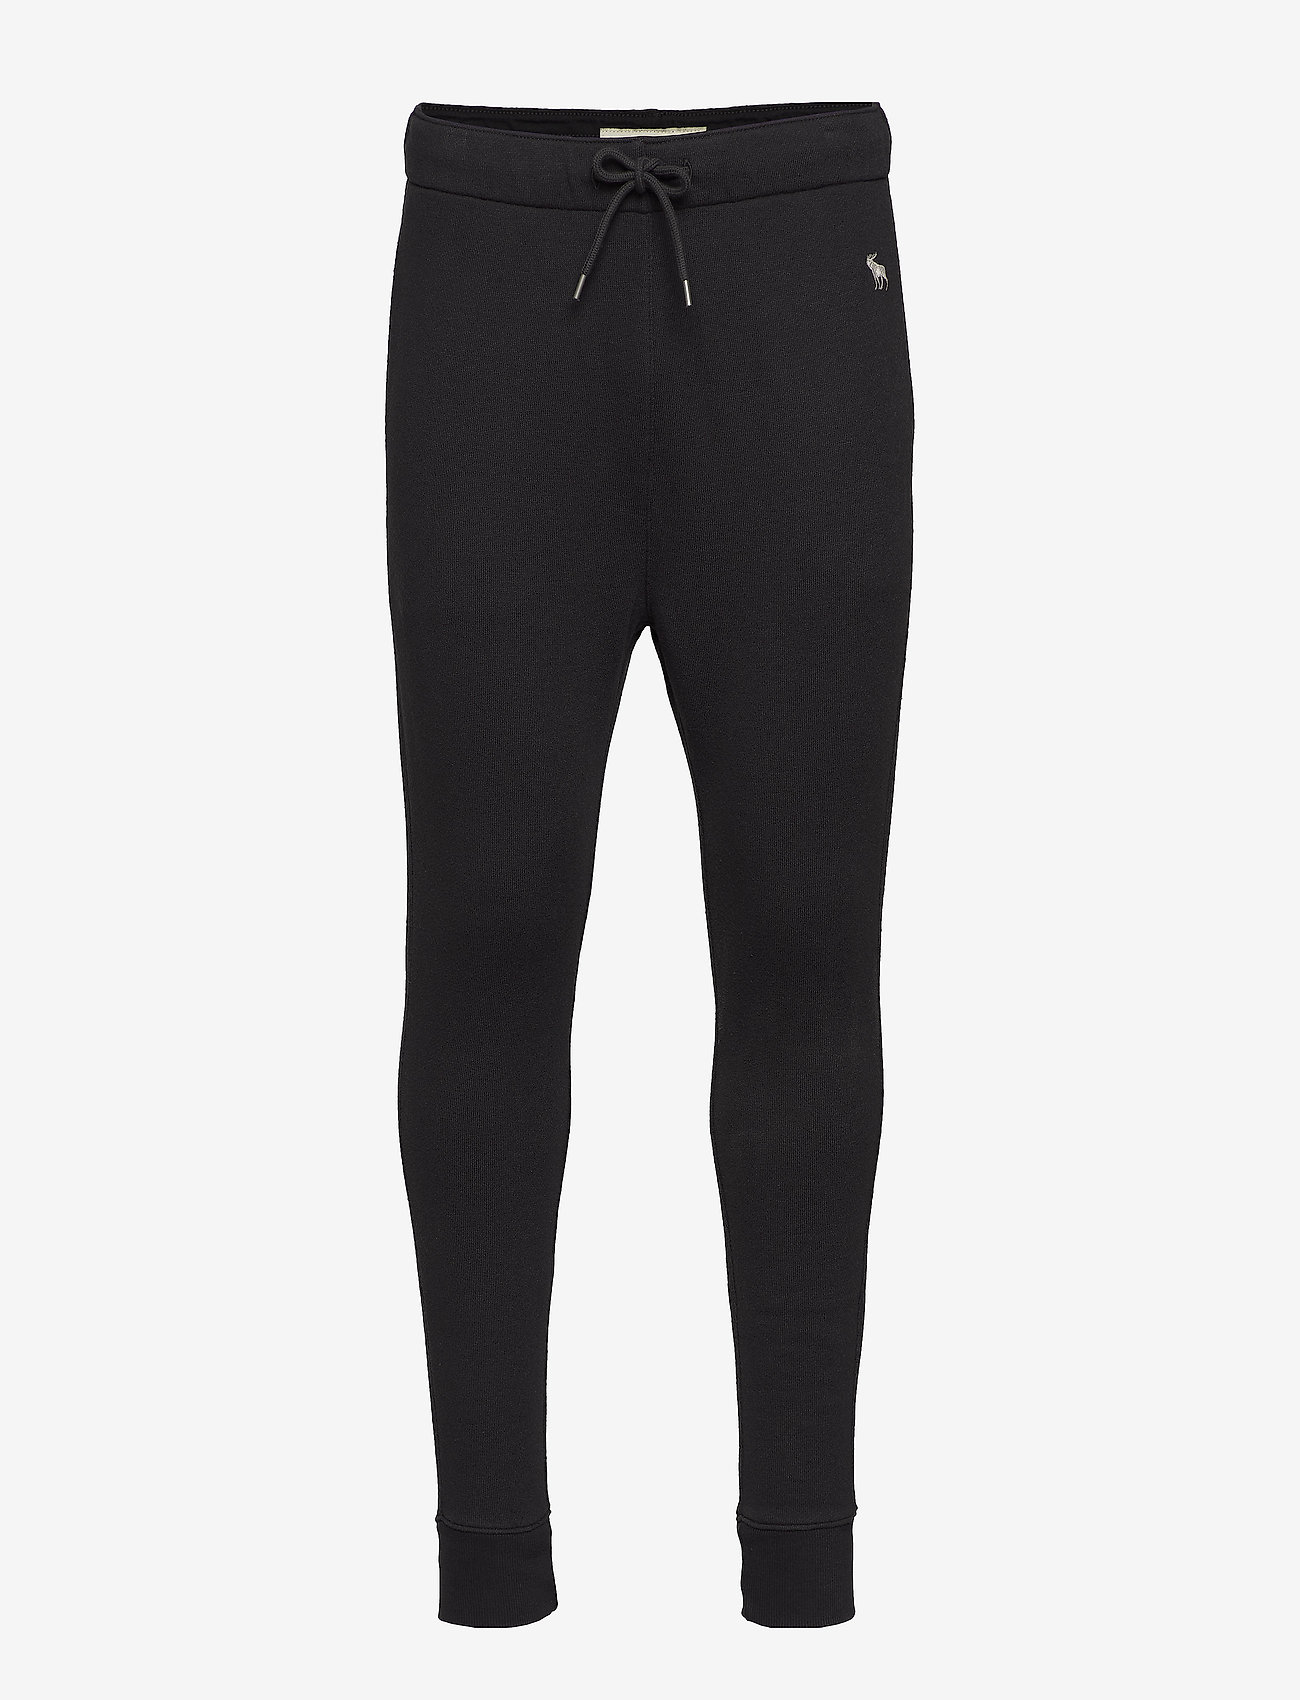 abercrombie & fitch jogger pants